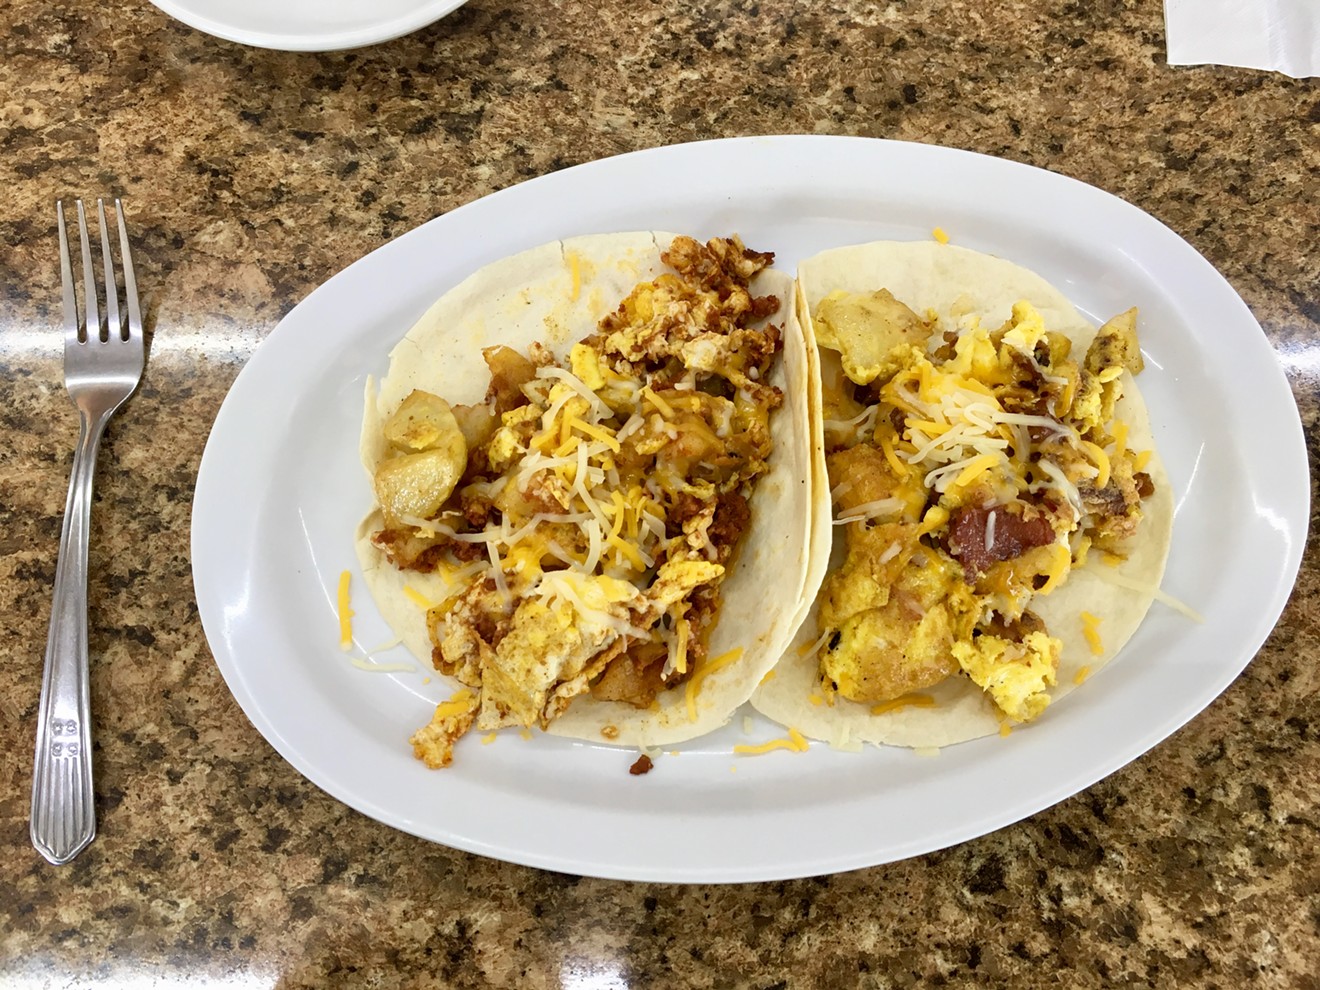 Two breakfast tacos, one with crumbled chorizo and the other with bacon, for six bucks and change.